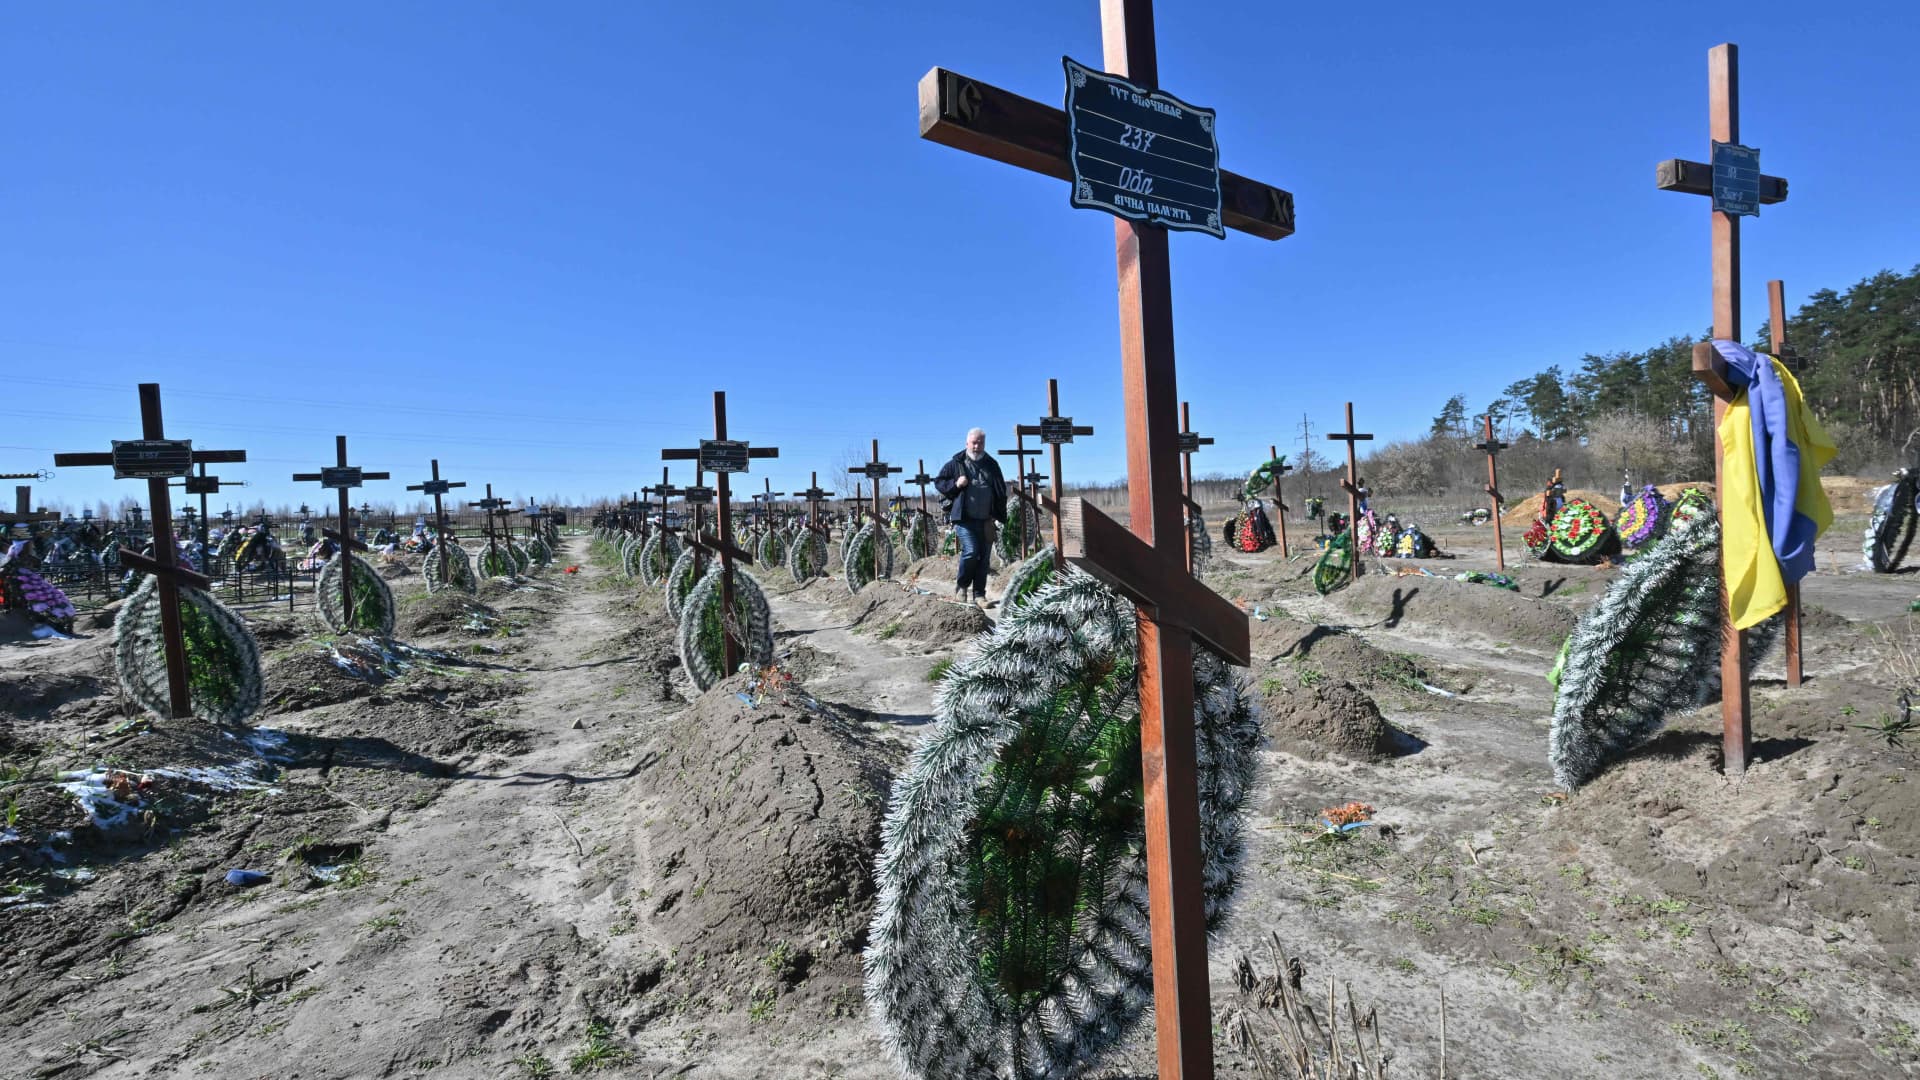 A man walks among graves of unidentified local people who were killled in the Ukrainian town of Bucha, northwest of Kyiv on March 30, 2023, a day before the celebration of the first anniversary of the Bucha liberation from Russian troops on March 31.